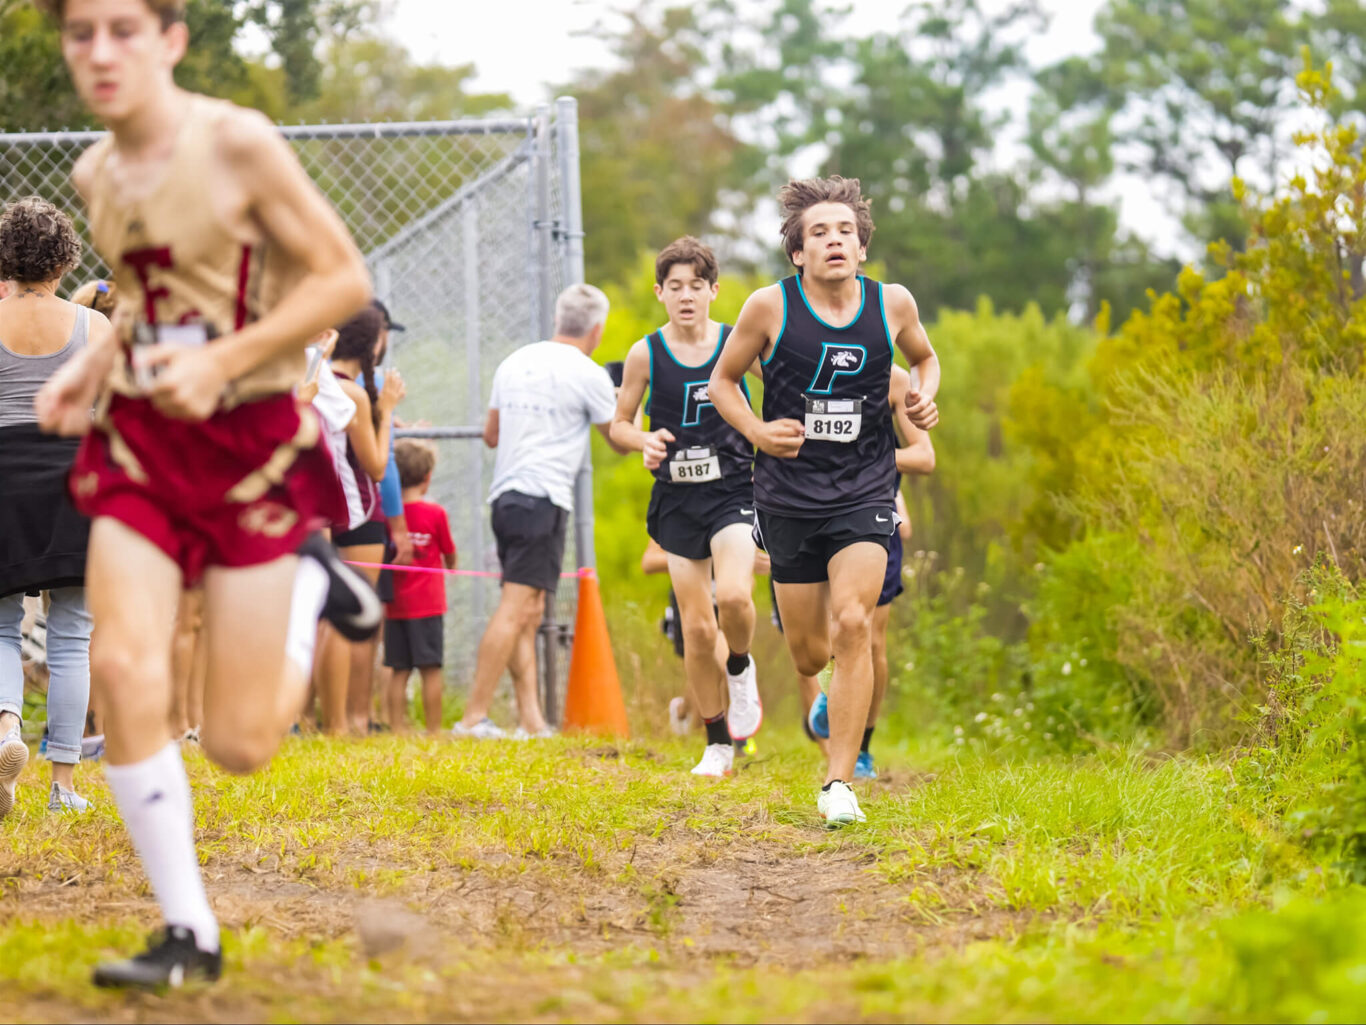 A bunch of boys participating in a cross country race.